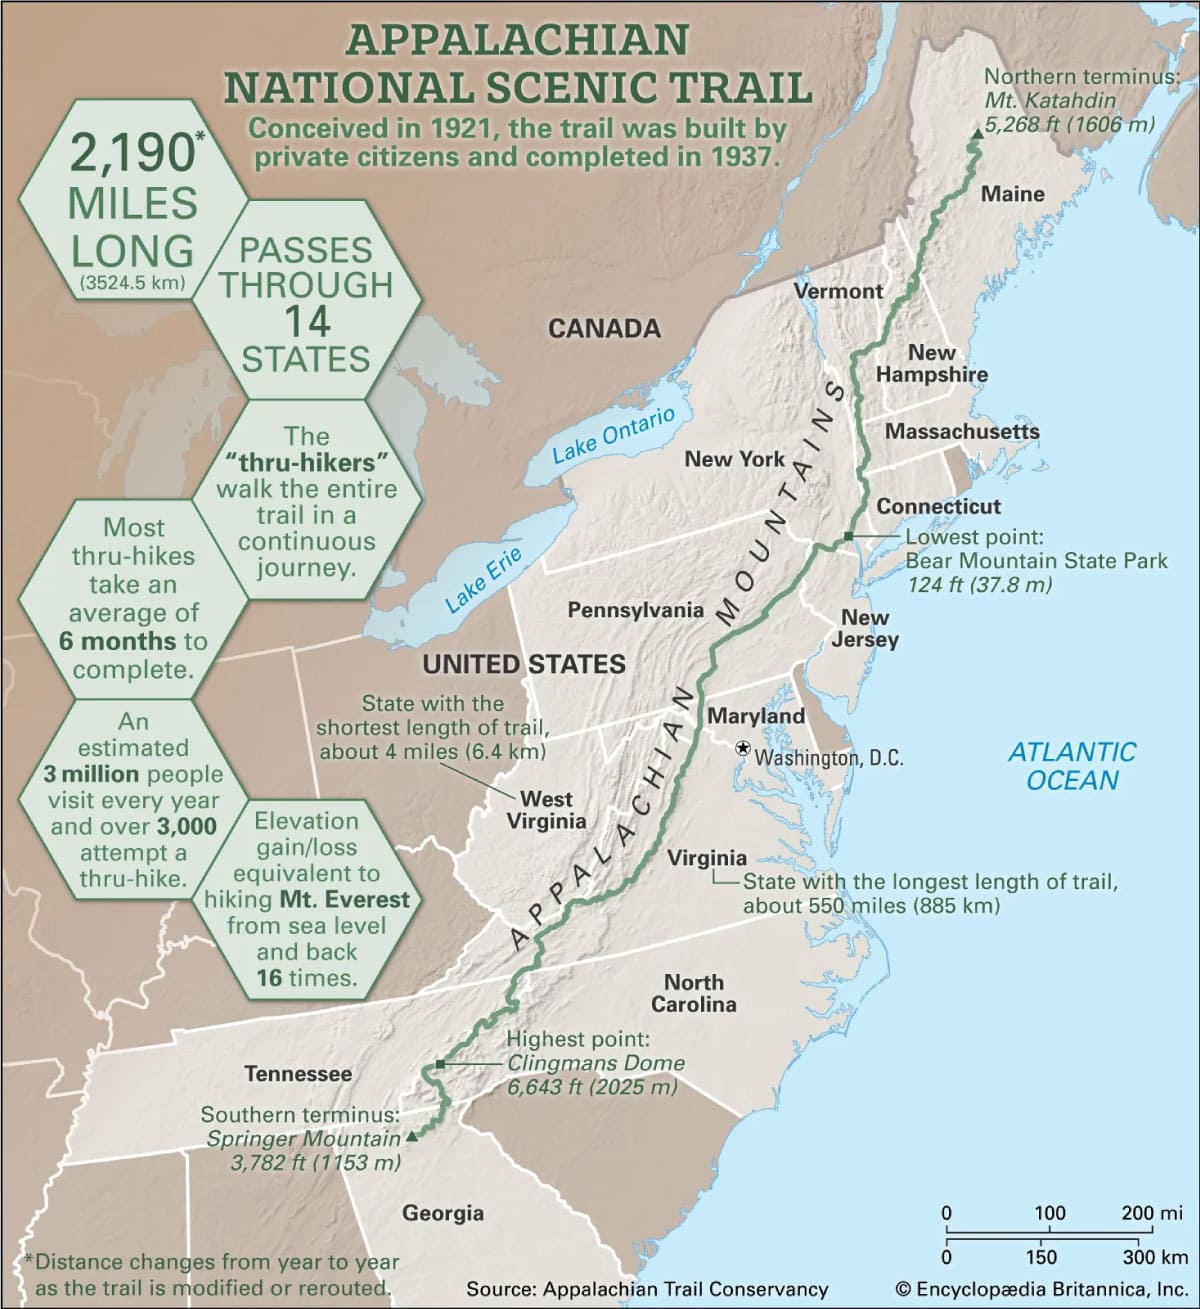 Infographic Details Appalachian National Scenic Trail 